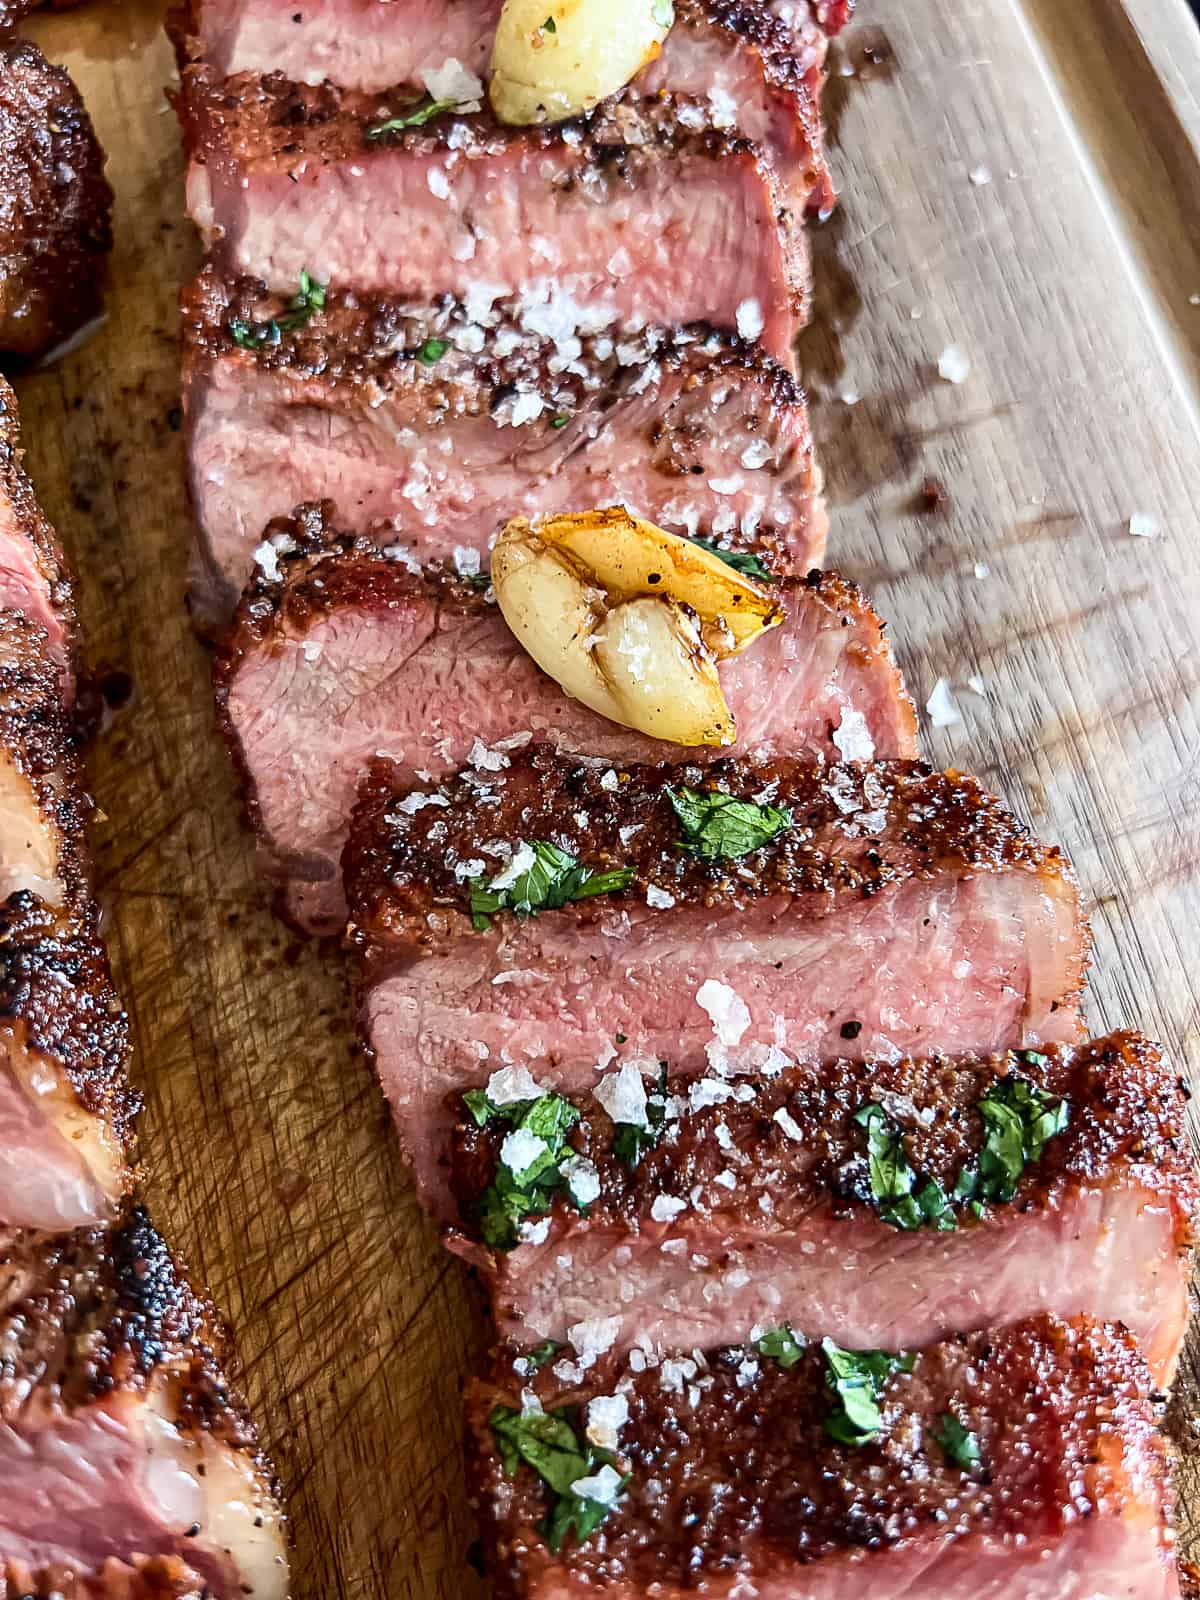 Closeup of roasted garlic on reverse seared Traeger New York Strip Steak smoked on the pellet grill with herbs and salt on top